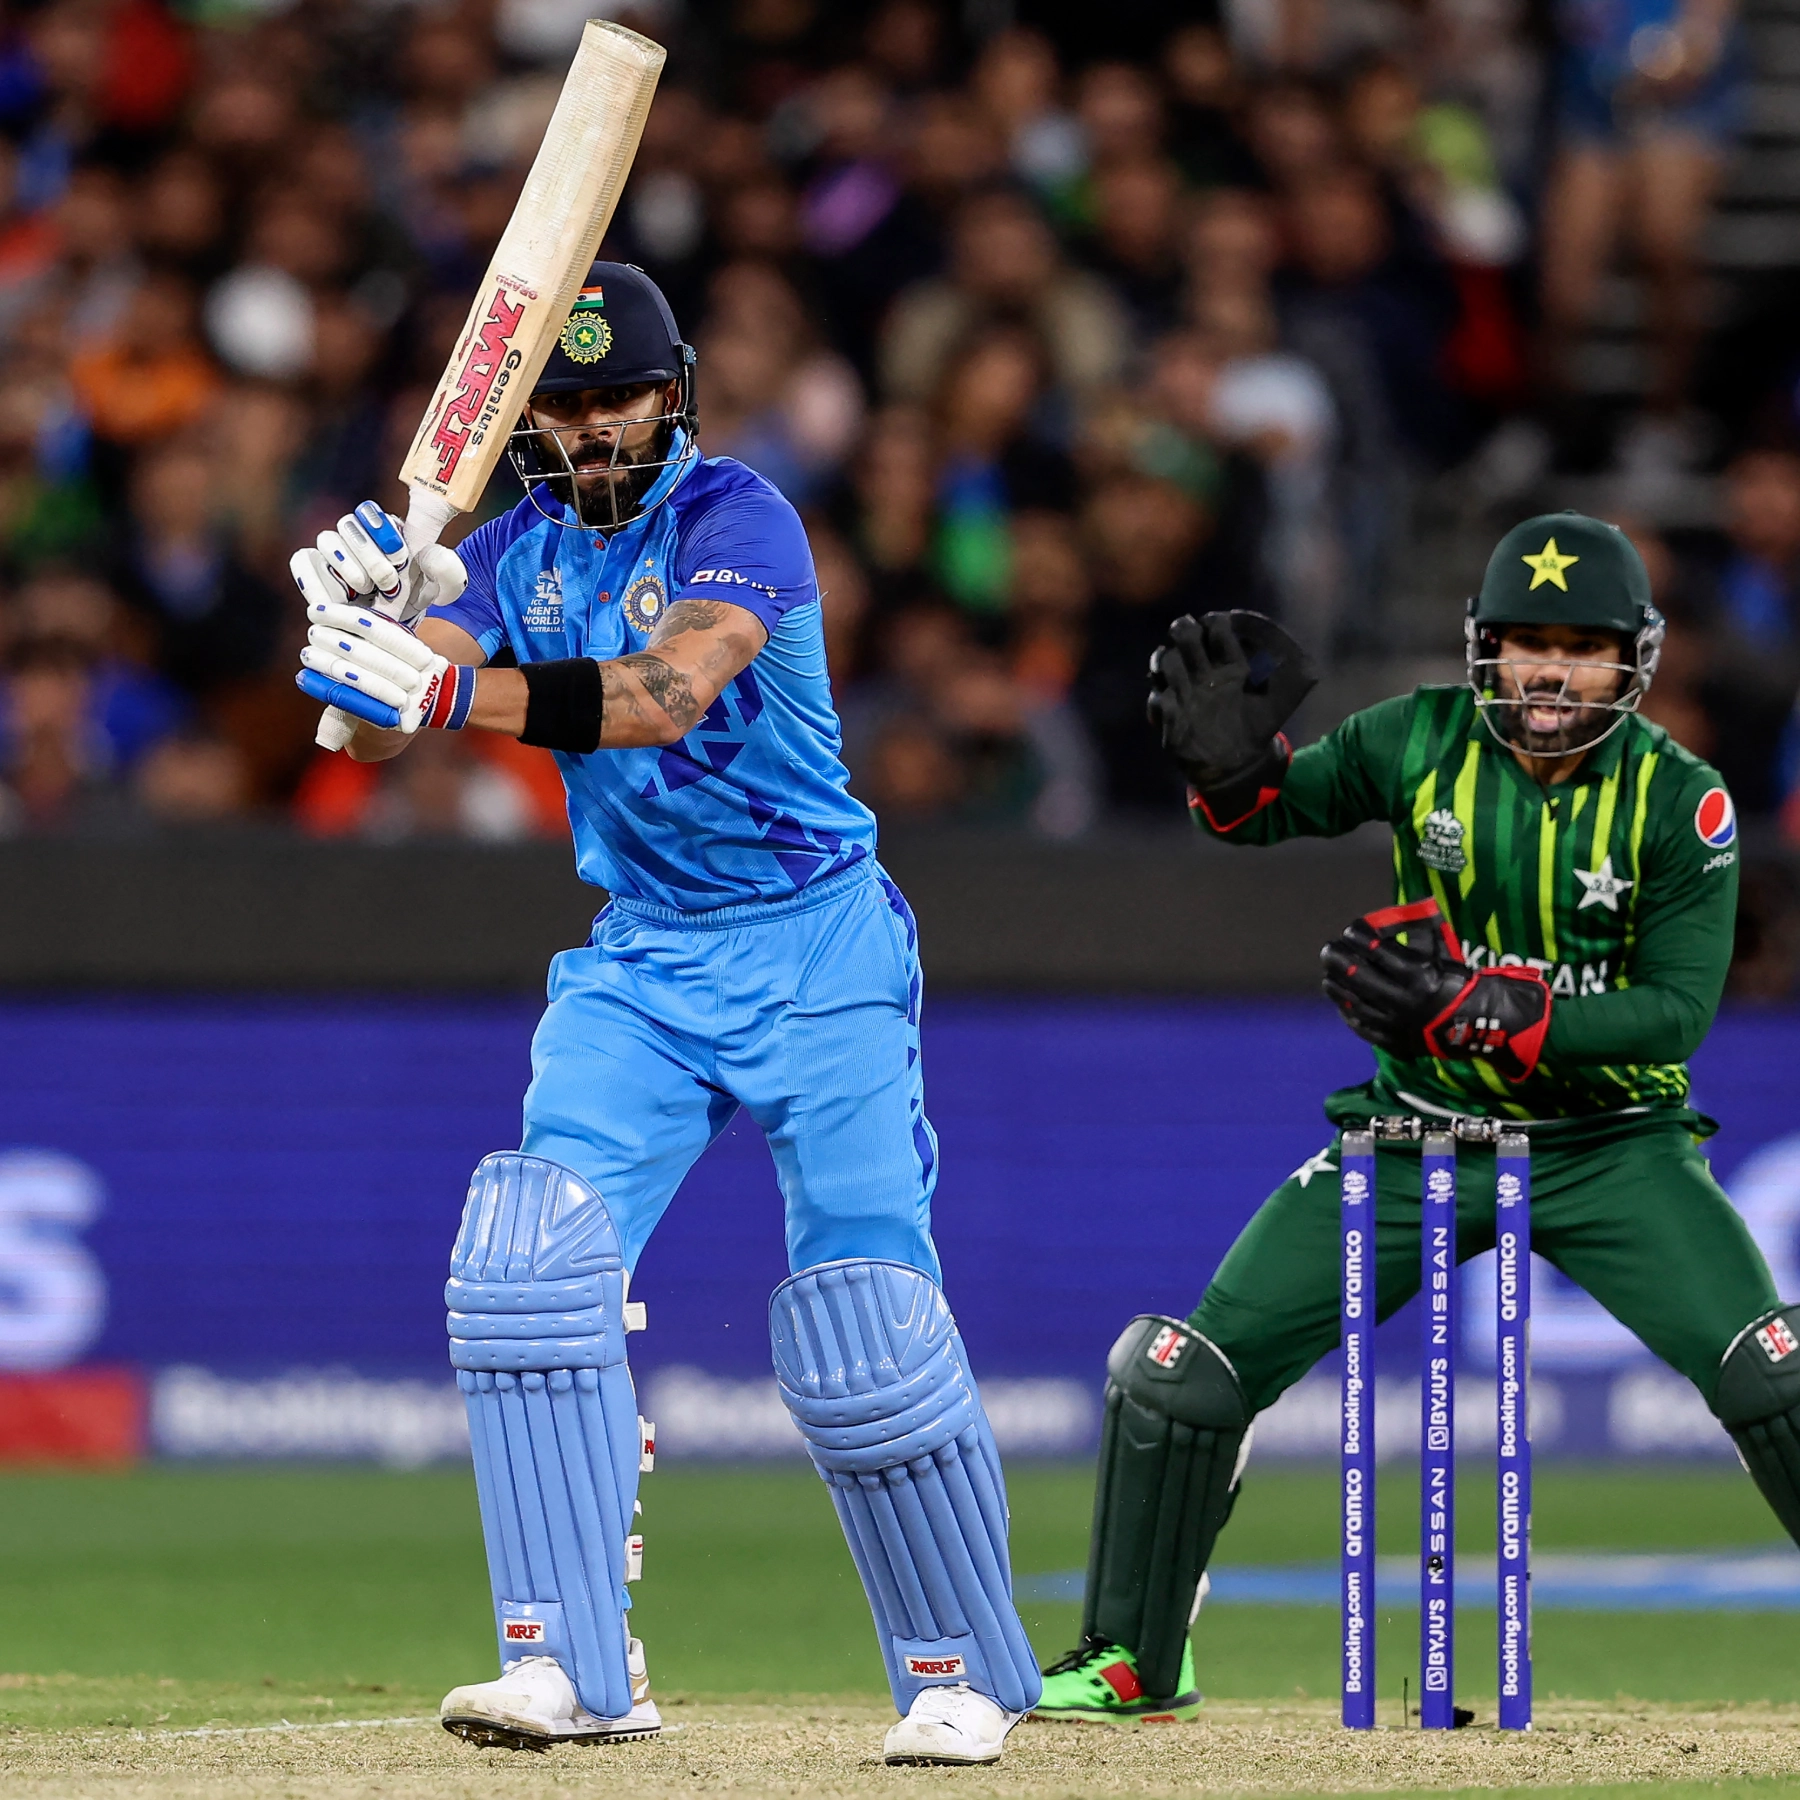 The Perfect Match: Unearthing the Connection Between Dental Implants and Cricket